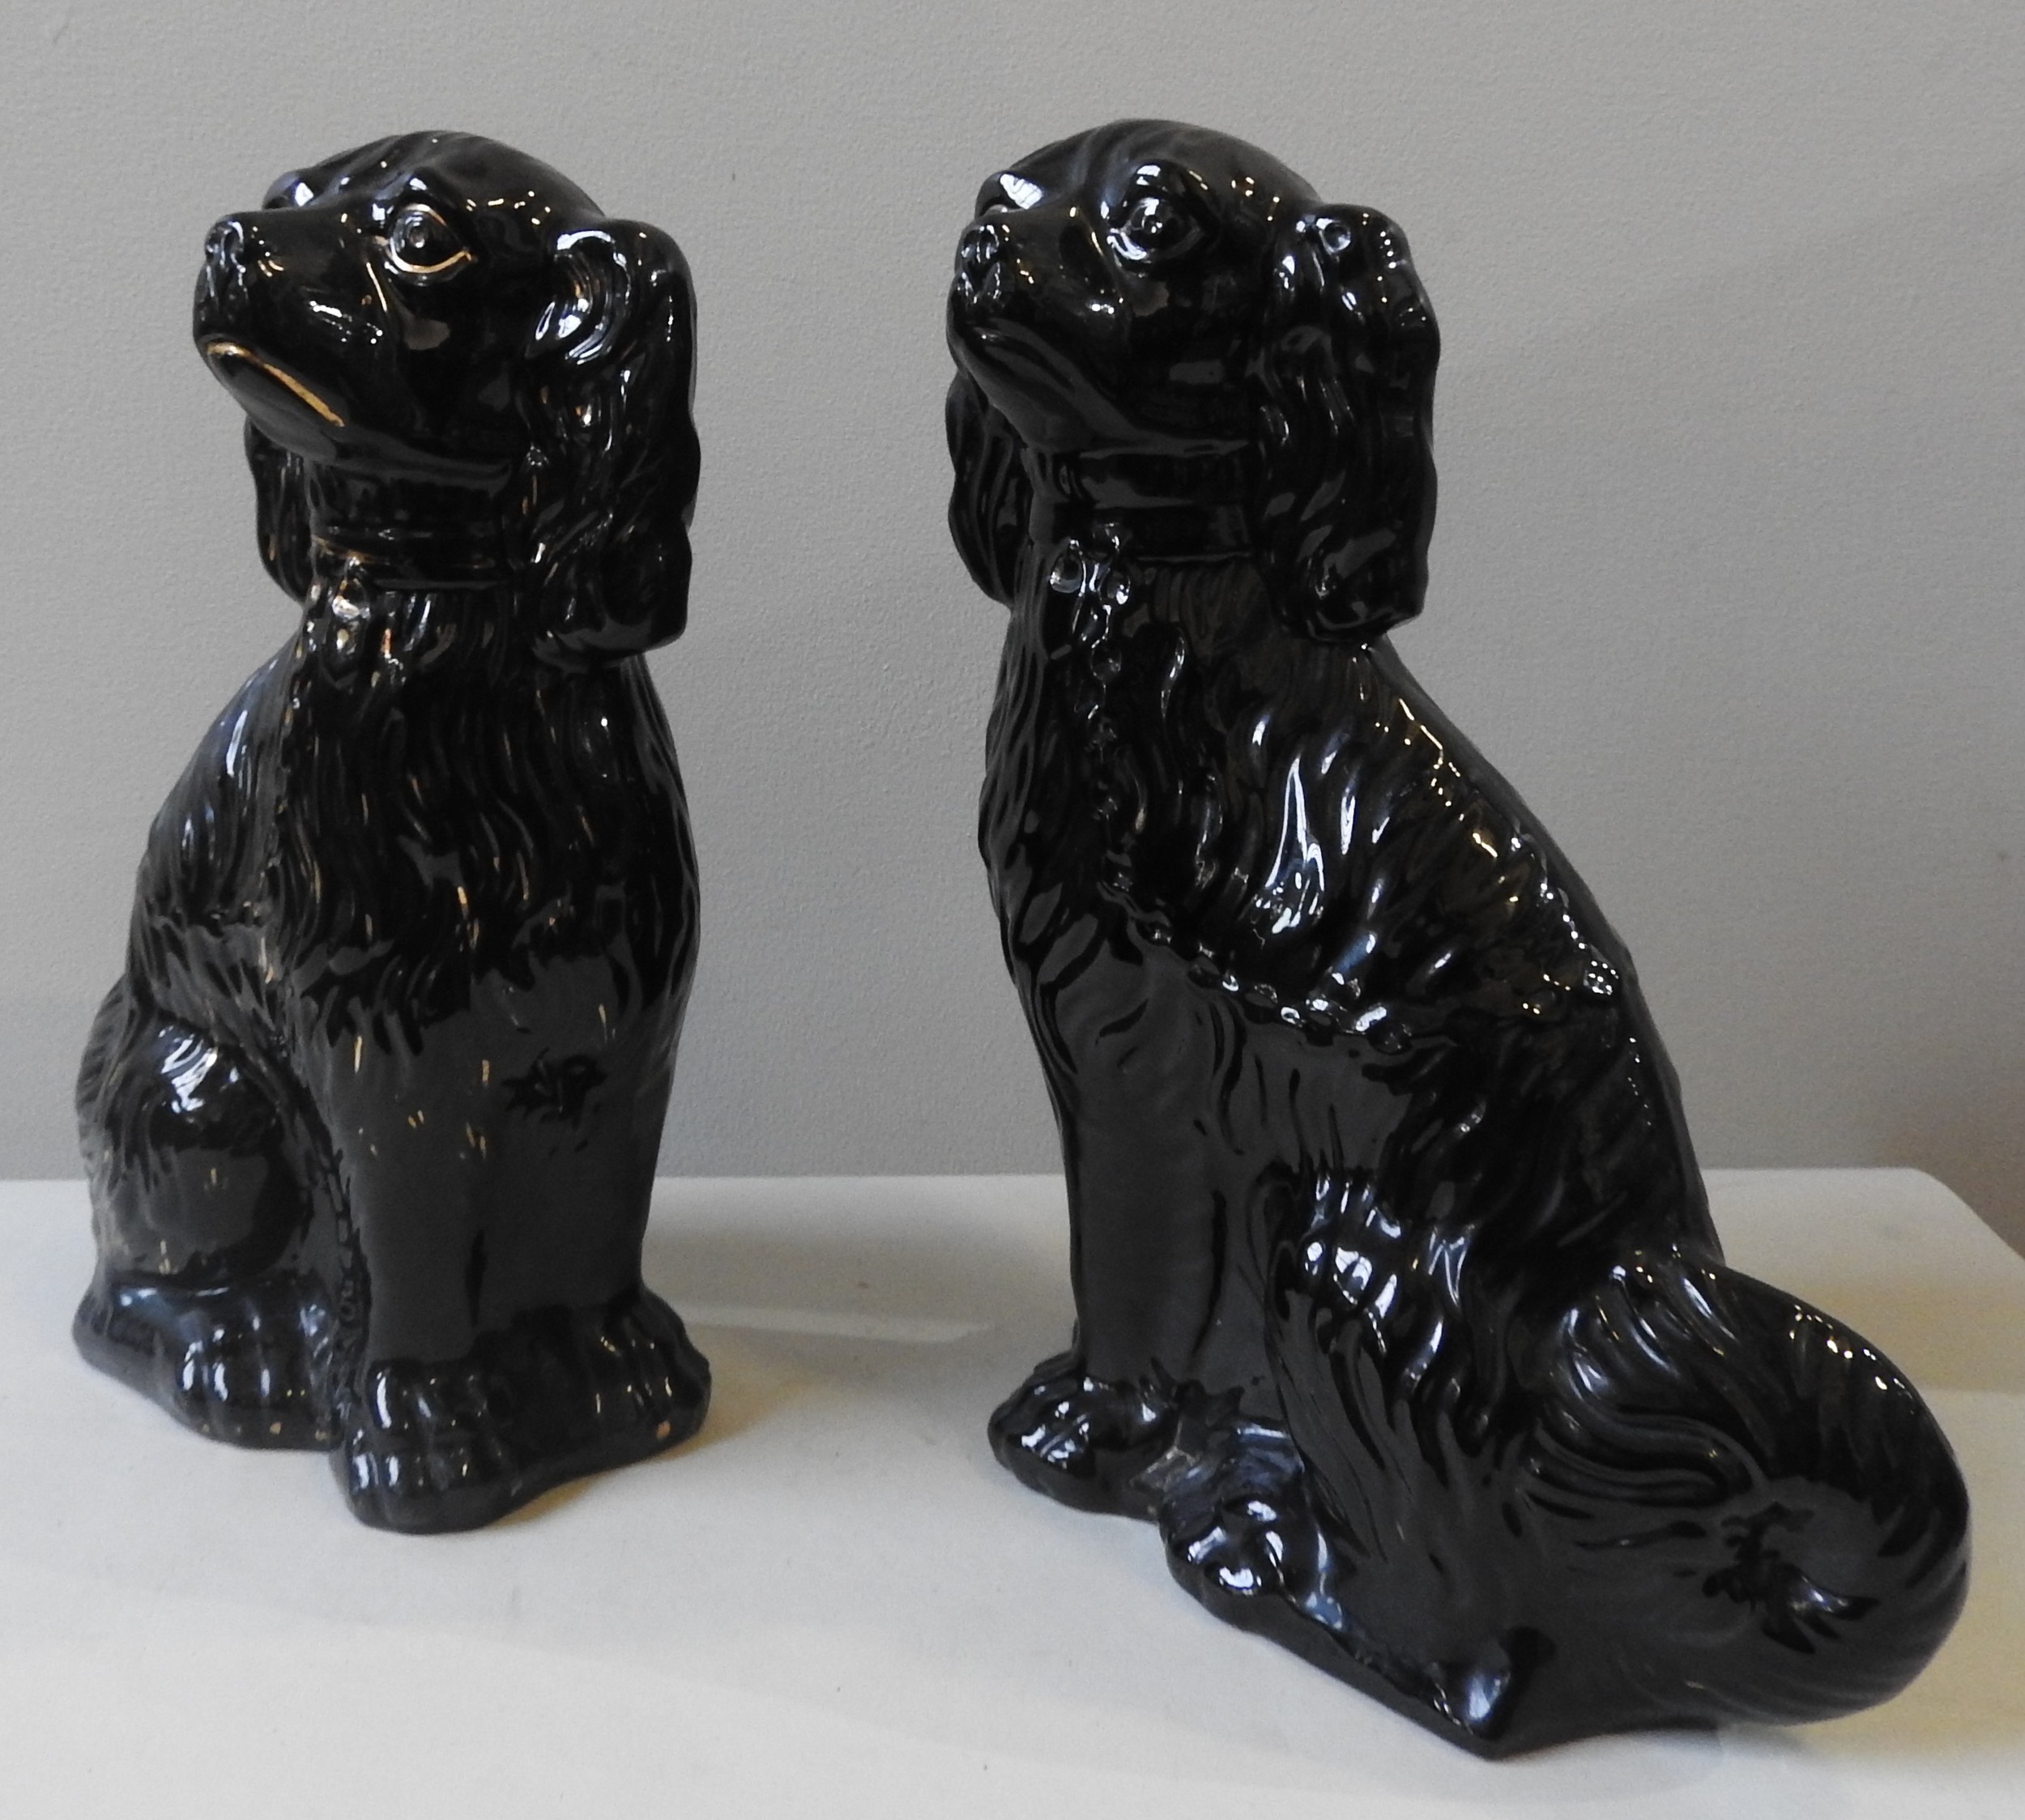 TWO BLACK GLAZED STAFFORDSHIRE SPANIEL FIGURES, 20TH CENTURY, in the Victorian style, with gilded - Image 2 of 3